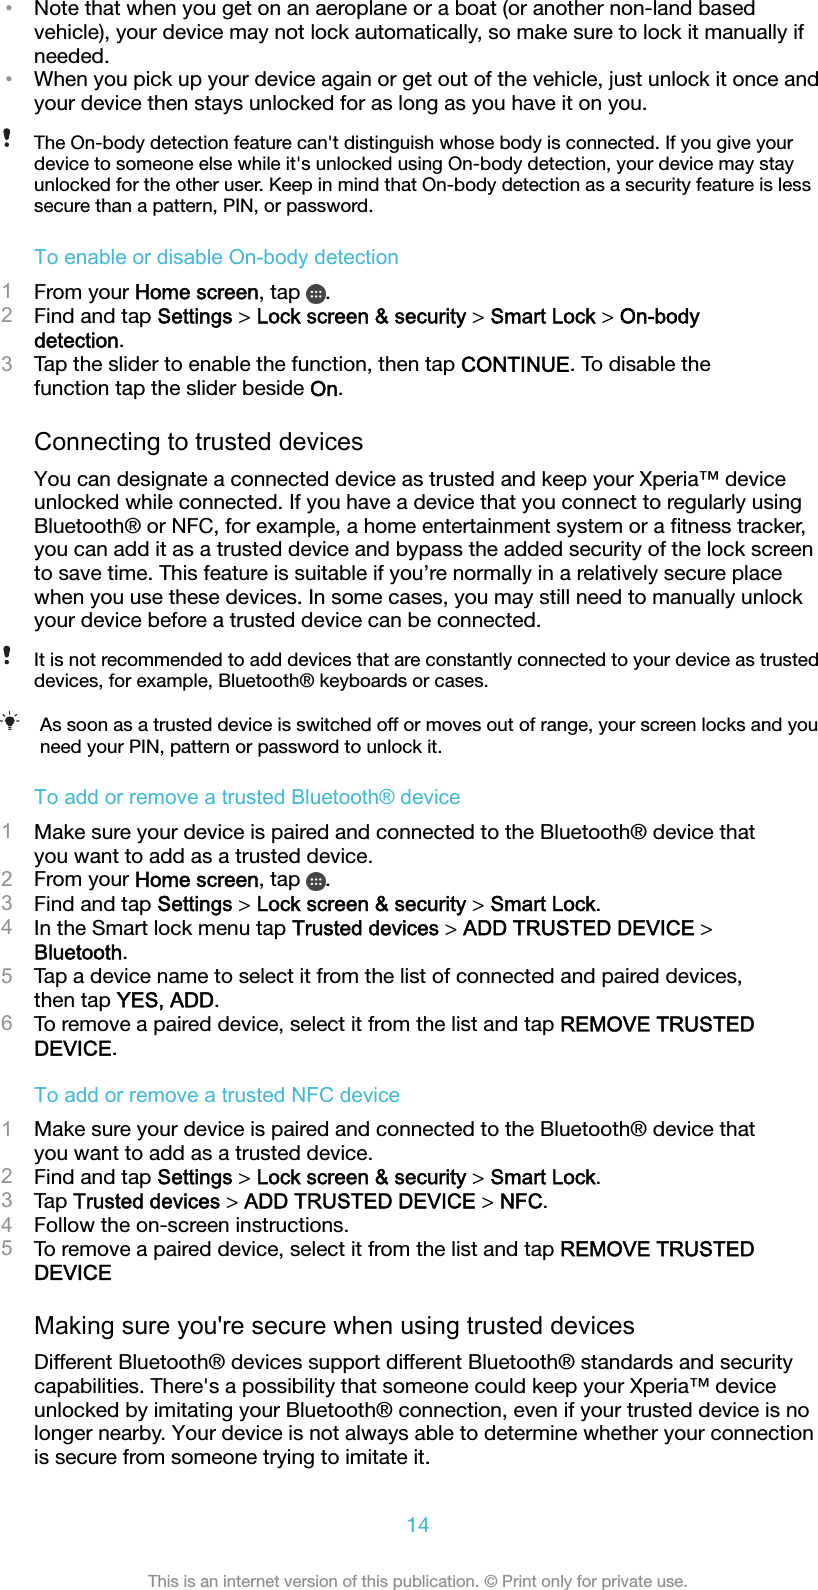 •Note that when you get on an aeroplane or a boat (or another non-land basedvehicle), your device may not lock automatically, so make sure to lock it manually ifneeded.•When you pick up your device again or get out of the vehicle, just unlock it once andyour device then stays unlocked for as long as you have it on you.The On-body detection feature can&apos;t distinguish whose body is connected. If you give yourdevice to someone else while it&apos;s unlocked using On-body detection, your device may stayunlocked for the other user. Keep in mind that On-body detection as a security feature is lesssecure than a pattern, PIN, or password.To enable or disable On-body detection1From your Home screen, tap  .2Find and tap Settings &gt; Lock screen &amp; security &gt; Smart Lock &gt; On-bodydetection.3Tap the slider to enable the function, then tap CONTINUE. To disable thefunction tap the slider beside On.Connecting to trusted devicesYou can designate a connected device as trusted and keep your Xperia™ deviceunlocked while connected. If you have a device that you connect to regularly usingBluetooth® or NFC, for example, a home entertainment system or a ﬁtness tracker,you can add it as a trusted device and bypass the added security of the lock screento save time. This feature is suitable if you’re normally in a relatively secure placewhen you use these devices. In some cases, you may still need to manually unlockyour device before a trusted device can be connected.It is not recommended to add devices that are constantly connected to your device as trusteddevices, for example, Bluetooth® keyboards or cases.As soon as a trusted device is switched off or moves out of range, your screen locks and youneed your PIN, pattern or password to unlock it.To add or remove a trusted Bluetooth® device1Make sure your device is paired and connected to the Bluetooth® device thatyou want to add as a trusted device.2From your Home screen, tap  .3Find and tap Settings &gt; Lock screen &amp; security &gt; Smart Lock.4In the Smart lock menu tap Trusted devices &gt; ADD TRUSTED DEVICE &gt;Bluetooth.5Tap a device name to select it from the list of connected and paired devices,then tap YES, ADD.6To remove a paired device, select it from the list and tap REMOVE TRUSTEDDEVICE.To add or remove a trusted NFC device1Make sure your device is paired and connected to the Bluetooth® device thatyou want to add as a trusted device.2Find and tap Settings &gt; Lock screen &amp; security &gt; Smart Lock.3Tap Trusted devices &gt; ADD TRUSTED DEVICE &gt; NFC.4Follow the on-screen instructions.5To remove a paired device, select it from the list and tap REMOVE TRUSTEDDEVICEMaking sure you&apos;re secure when using trusted devicesDifferent Bluetooth® devices support different Bluetooth® standards and securitycapabilities. There&apos;s a possibility that someone could keep your Xperia™ deviceunlocked by imitating your Bluetooth® connection, even if your trusted device is nolonger nearby. Your device is not always able to determine whether your connectionis secure from someone trying to imitate it.14This is an internet version of this publication. © Print only for private use.